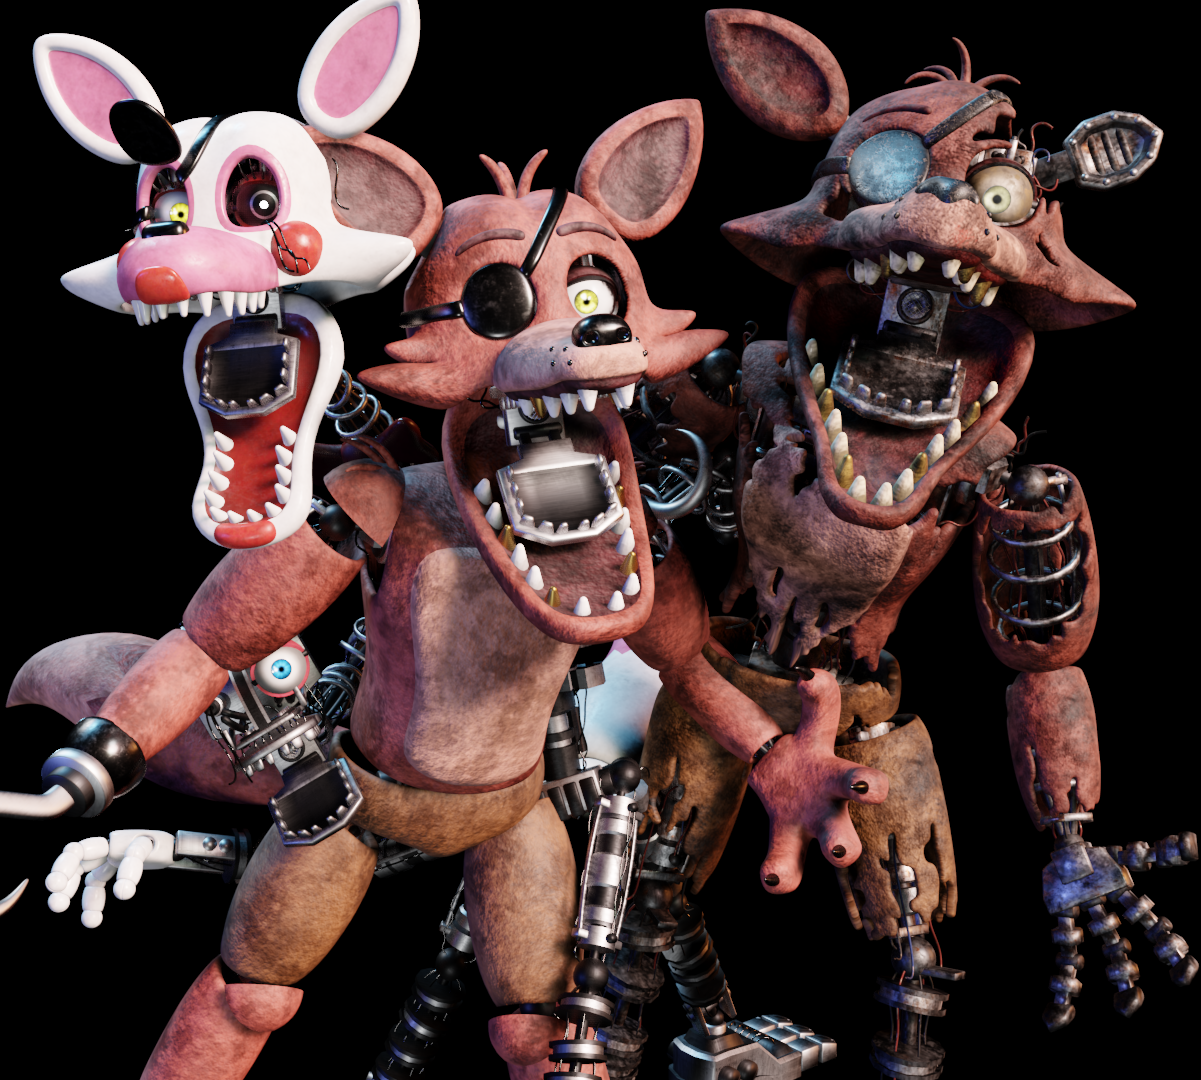 Colors Live - mangle and withered foxy :D by fnaf_butterz